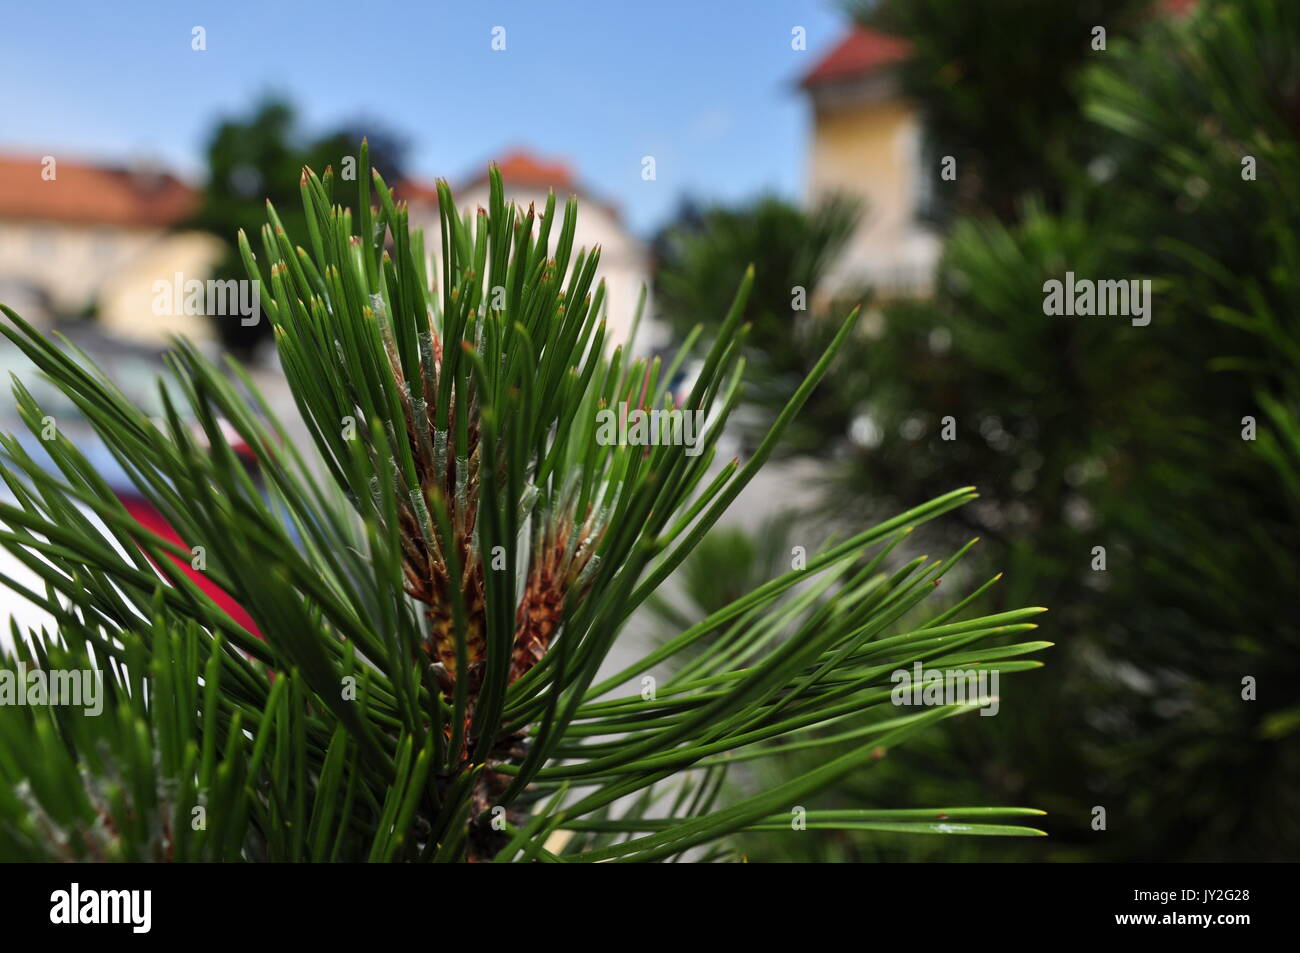 Green pine needles, vacation view, relax spot Stock Photo